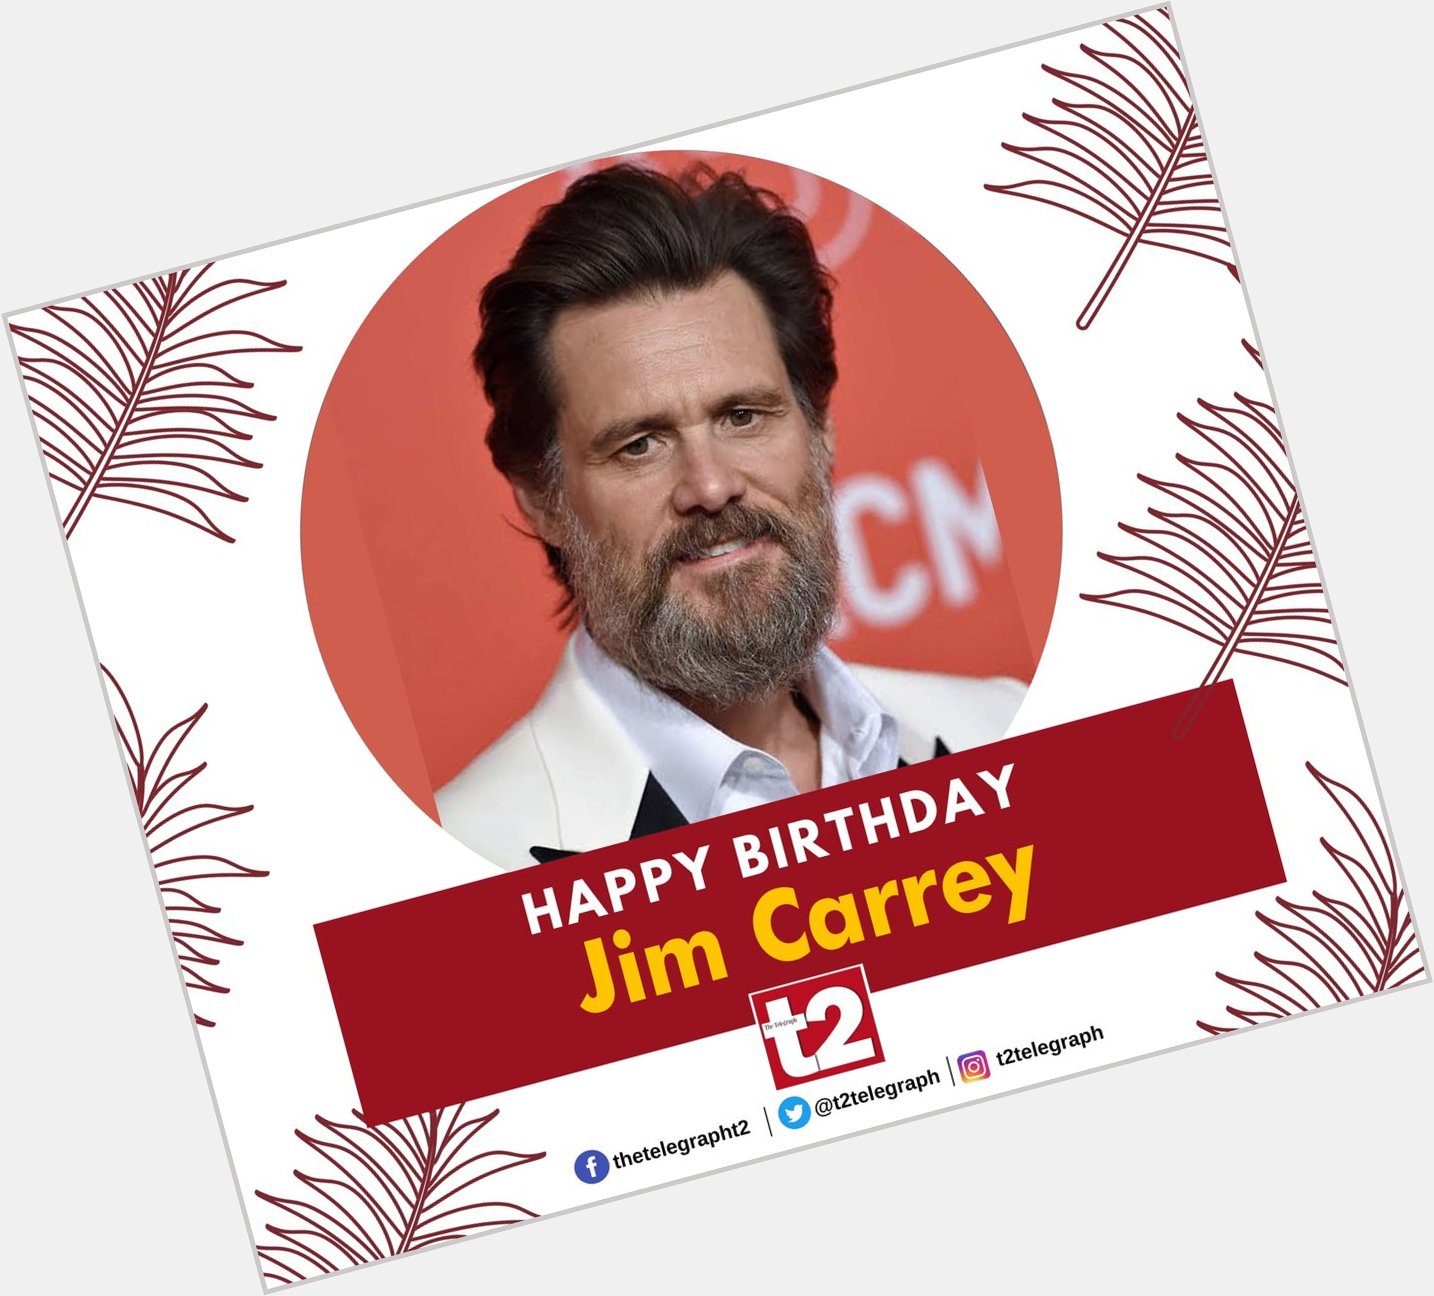 He has the ability to make us laugh with the twitch of an eyebrow. Happy birthday Jim Carrey 